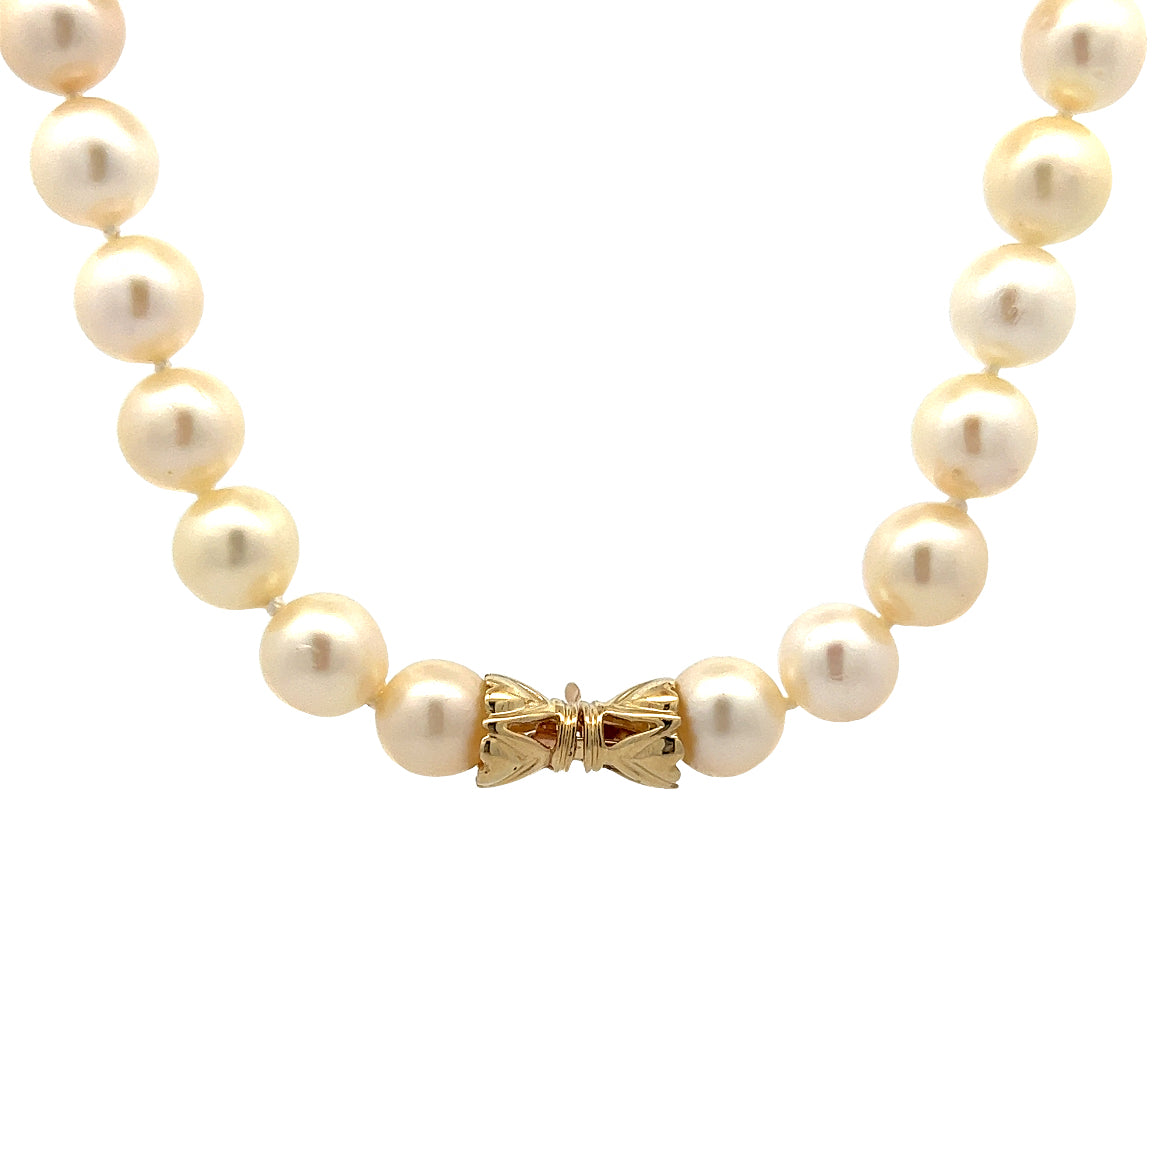 20 Inch Classic Pearl Necklace in 14k Yellow Gold